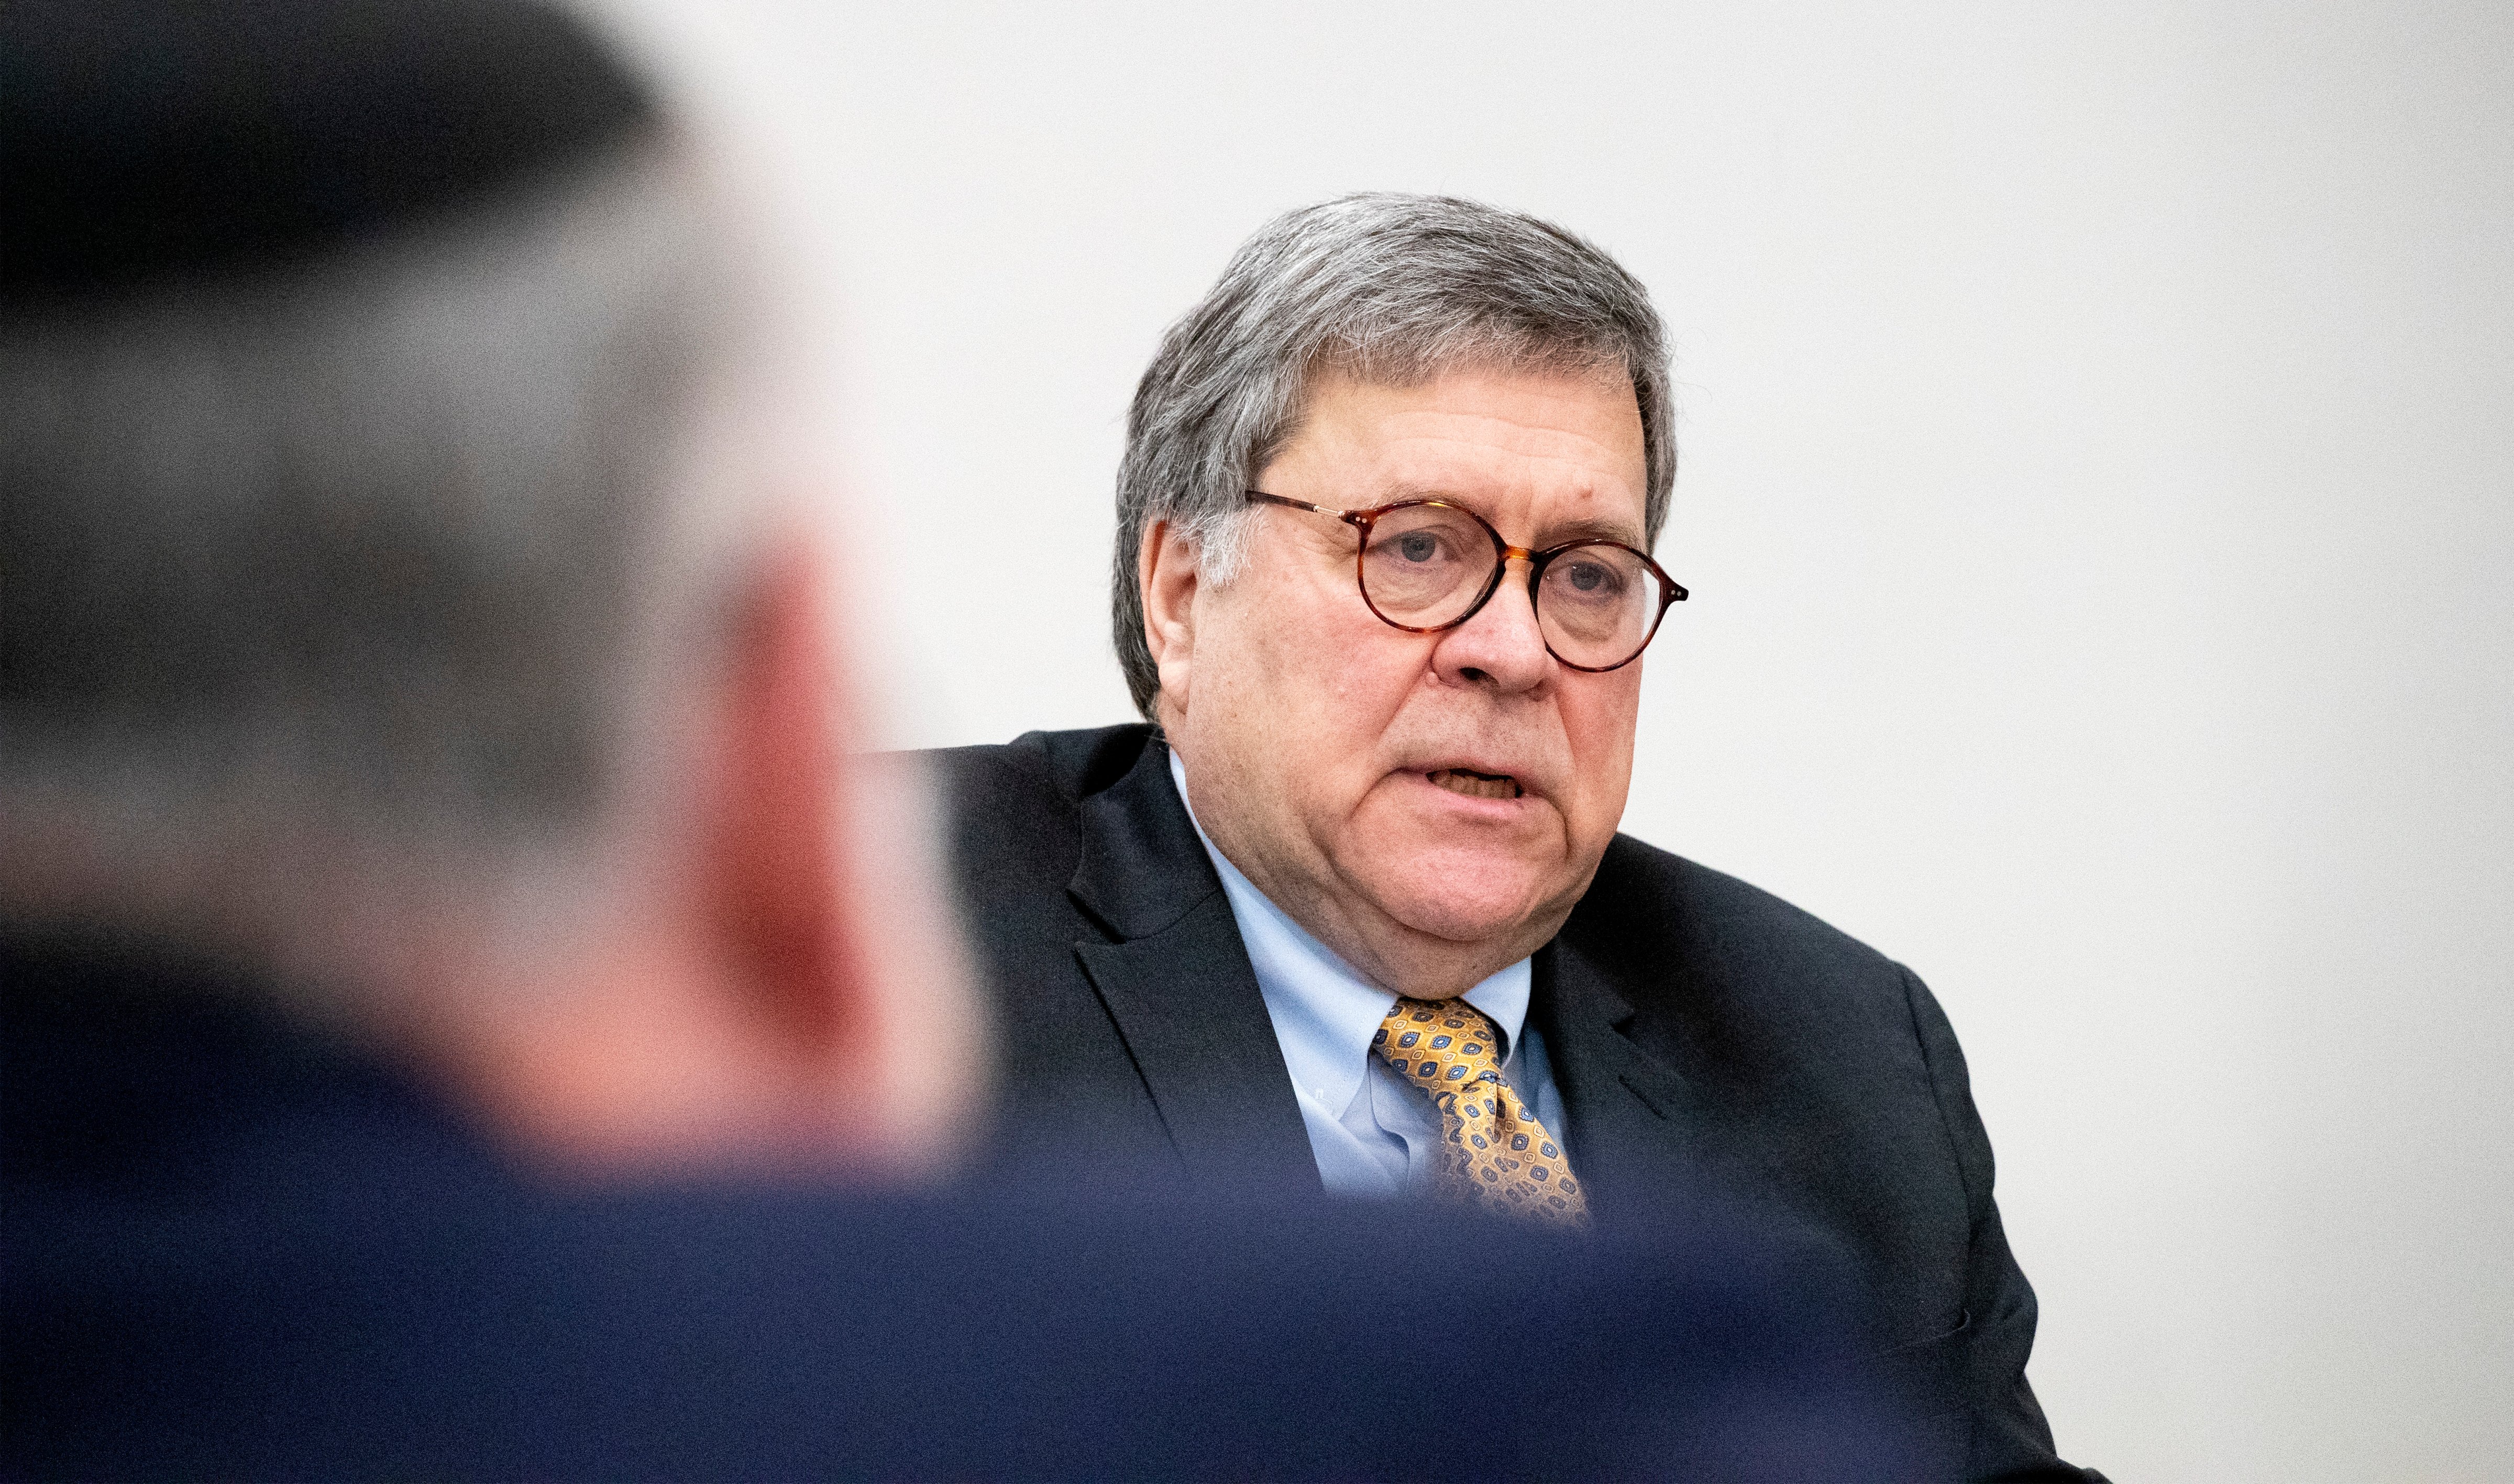 Attorney General William Barr speaks during a meeting with Jewish leaders at the Boro Park Jewish Community Council, Tuesday, Jan. 28, 2020 in New York. (Mark Lennihan—AP)